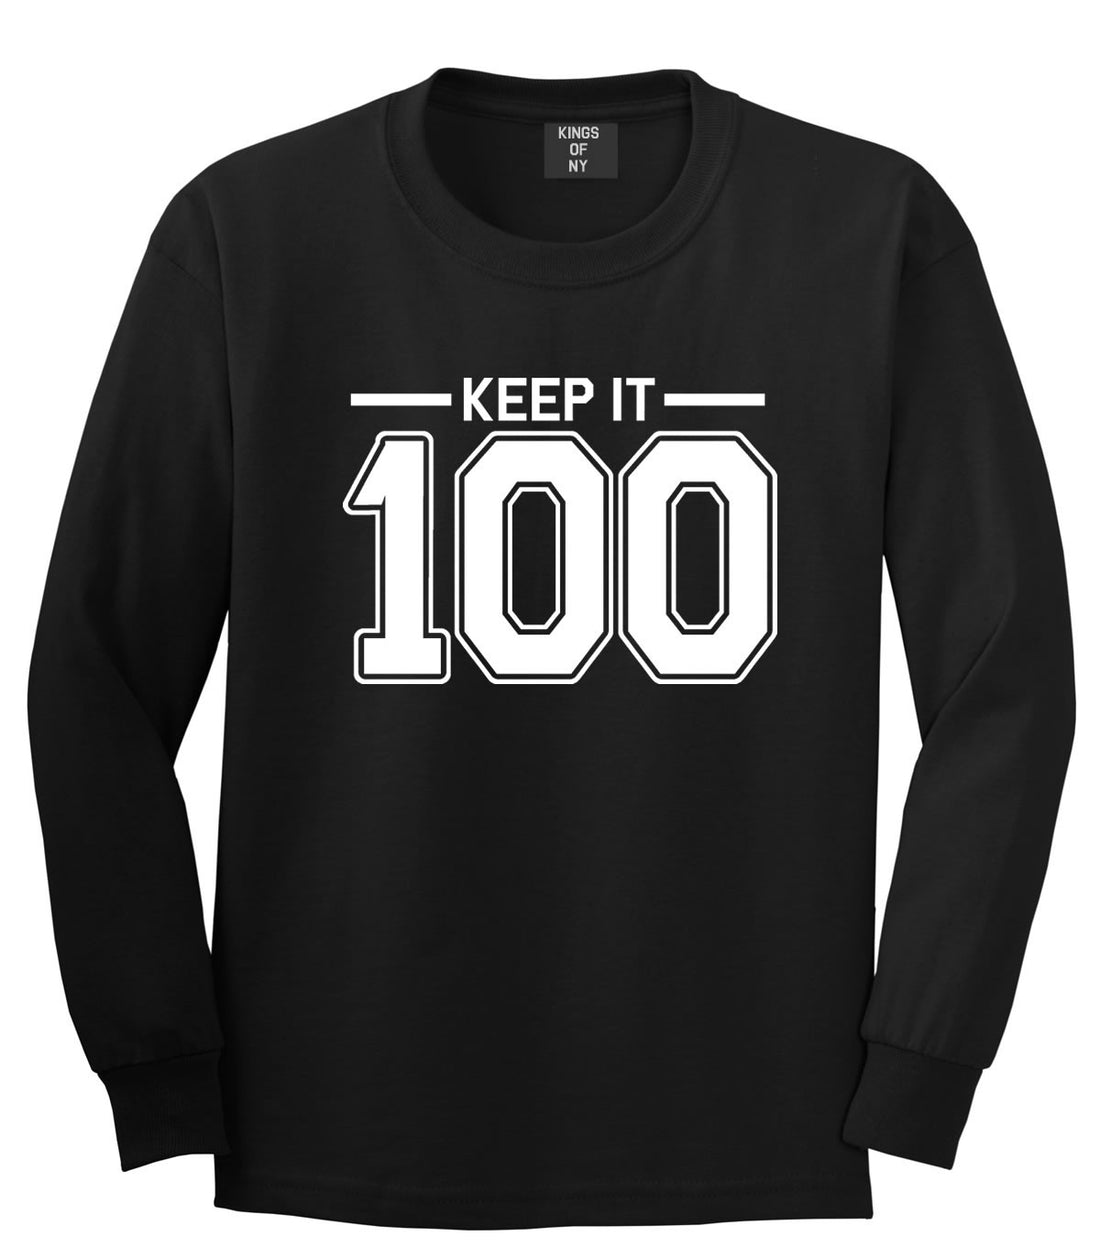 Keep It 100 Long Sleeve T-Shirt in Black by Kings Of NY